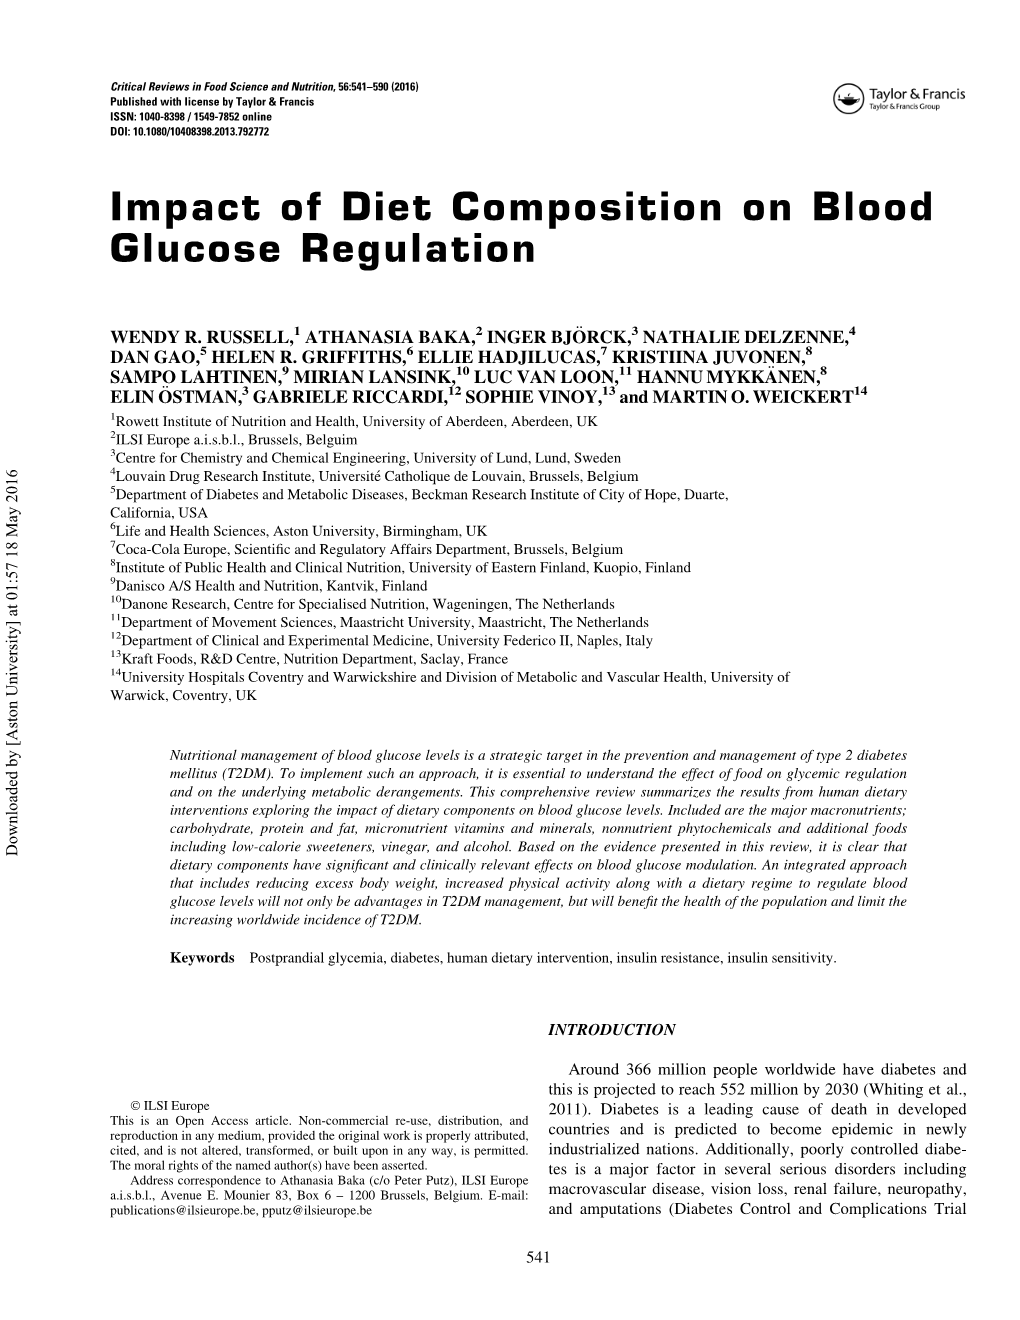 Impact of Diet Composition on Blood Glucose Regulation